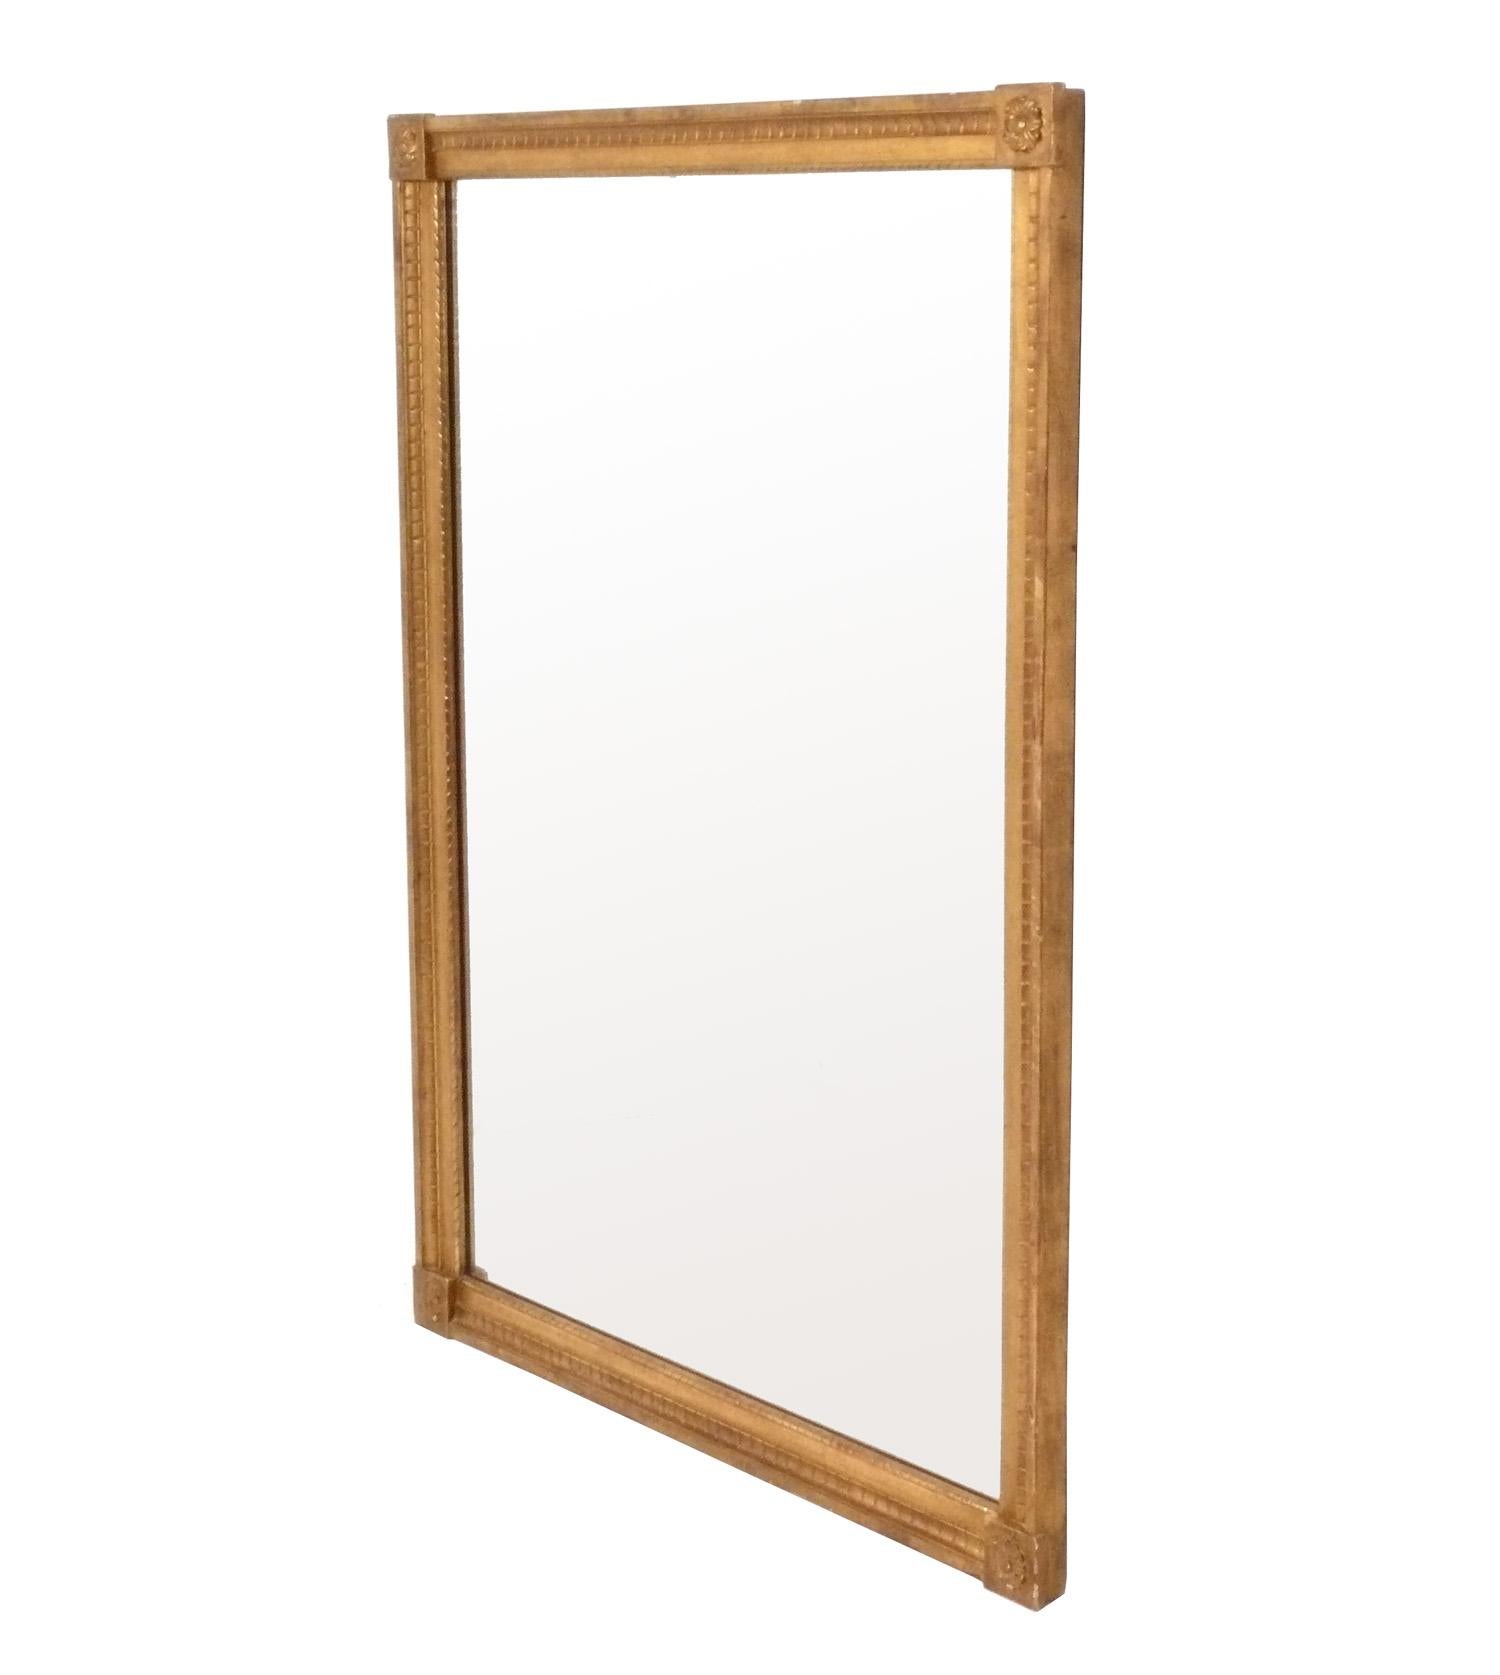 Gilt Italian mirror, recently removed from the famed Carlyle hotel in NYC, originally from Italy, circa 1960s. It retains its original warm patina to both the gilt wood frame and the original mirror.